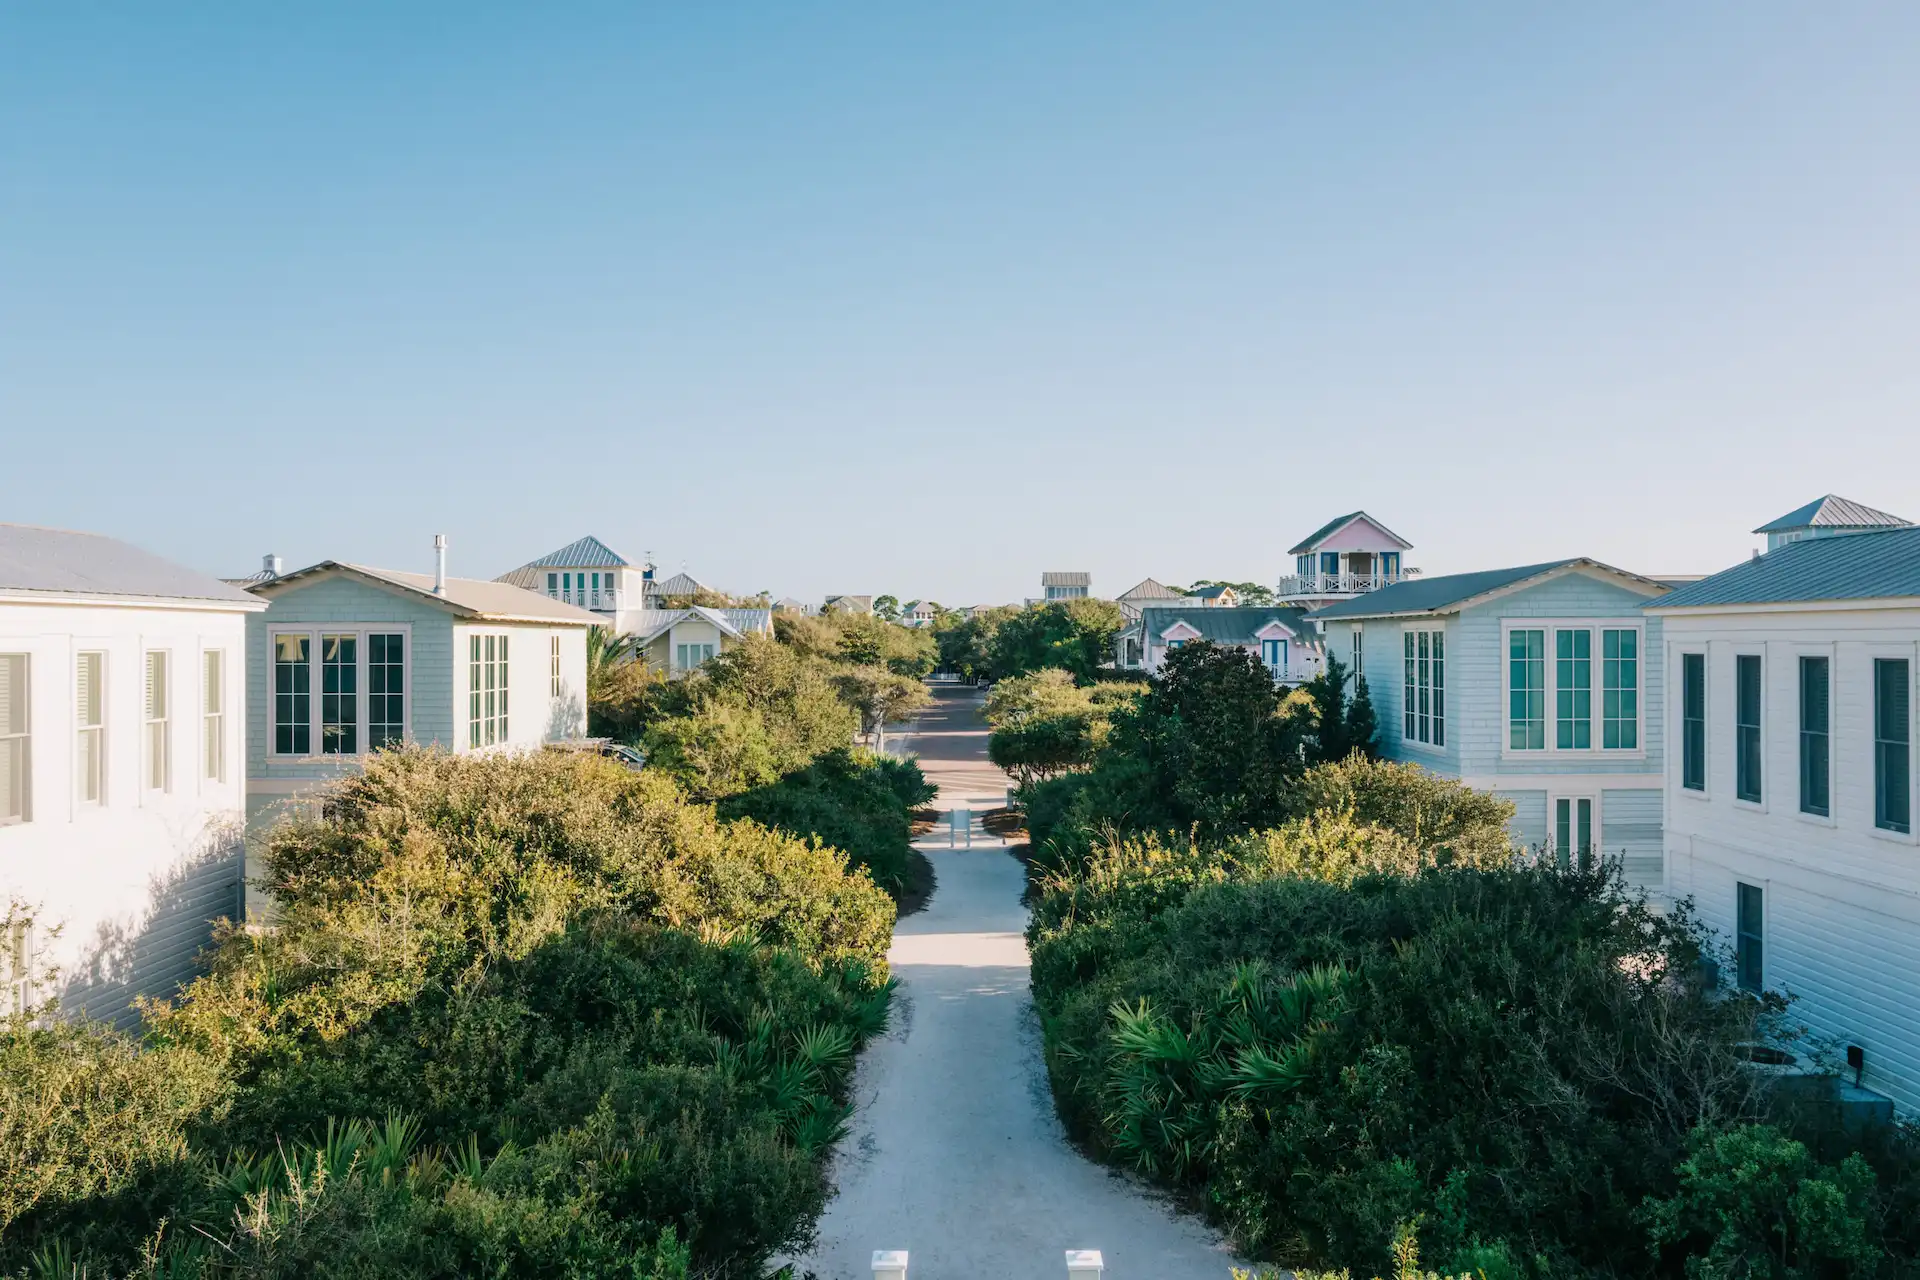 Seaside Homes | Path through the community with geen vegetation